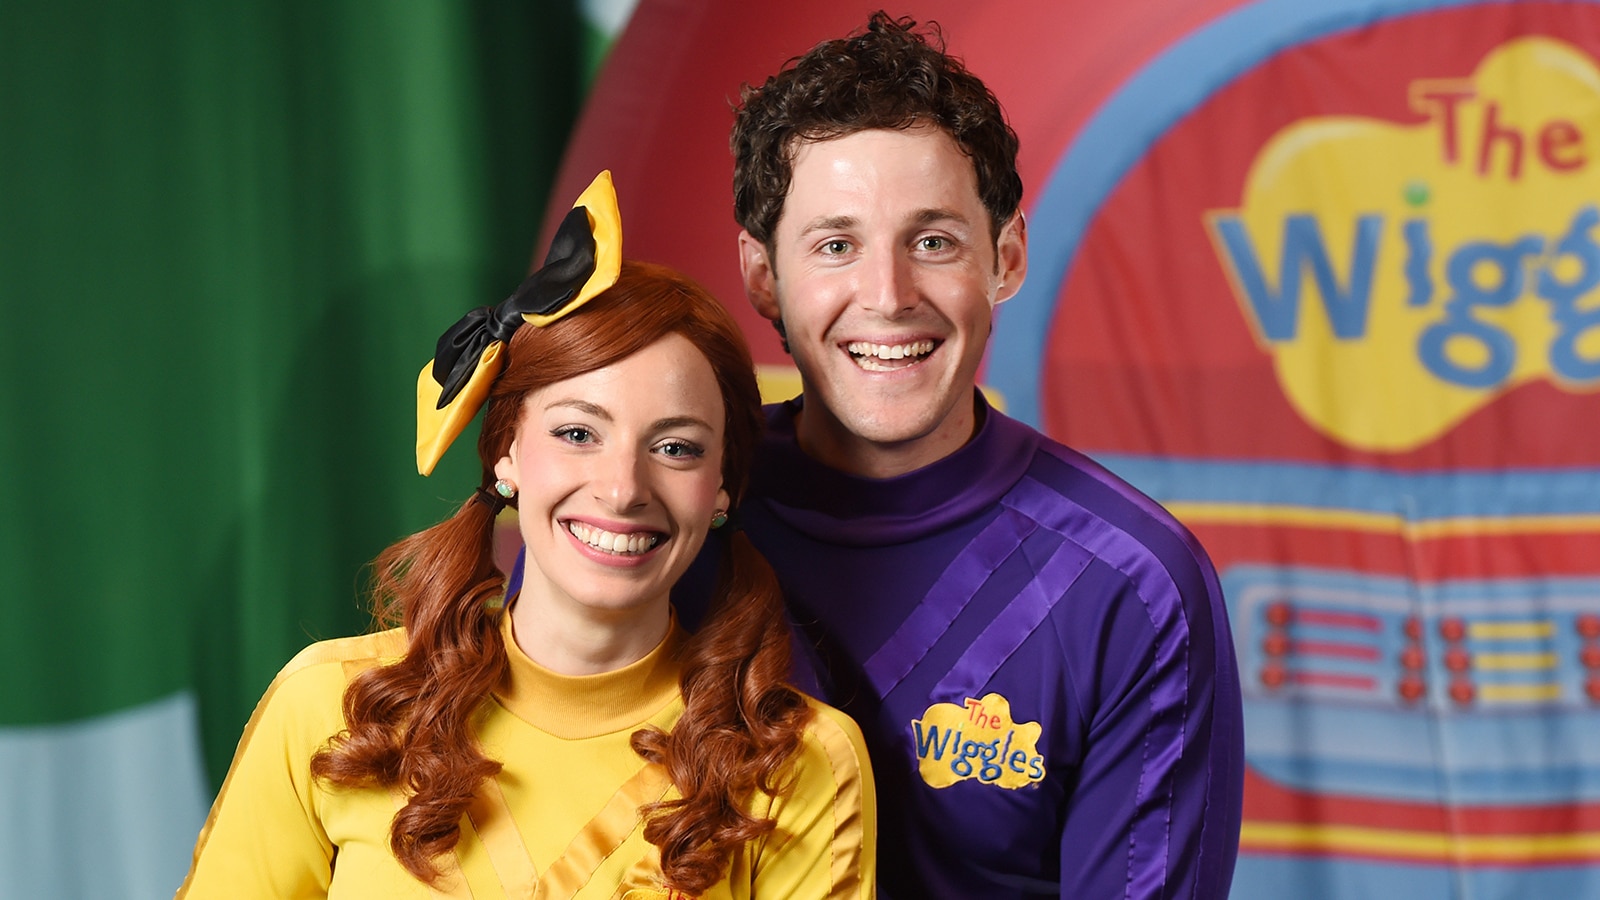 The Wiggles Couple Emma Watkins & Lachlan Gillespie Split After Two Yea...